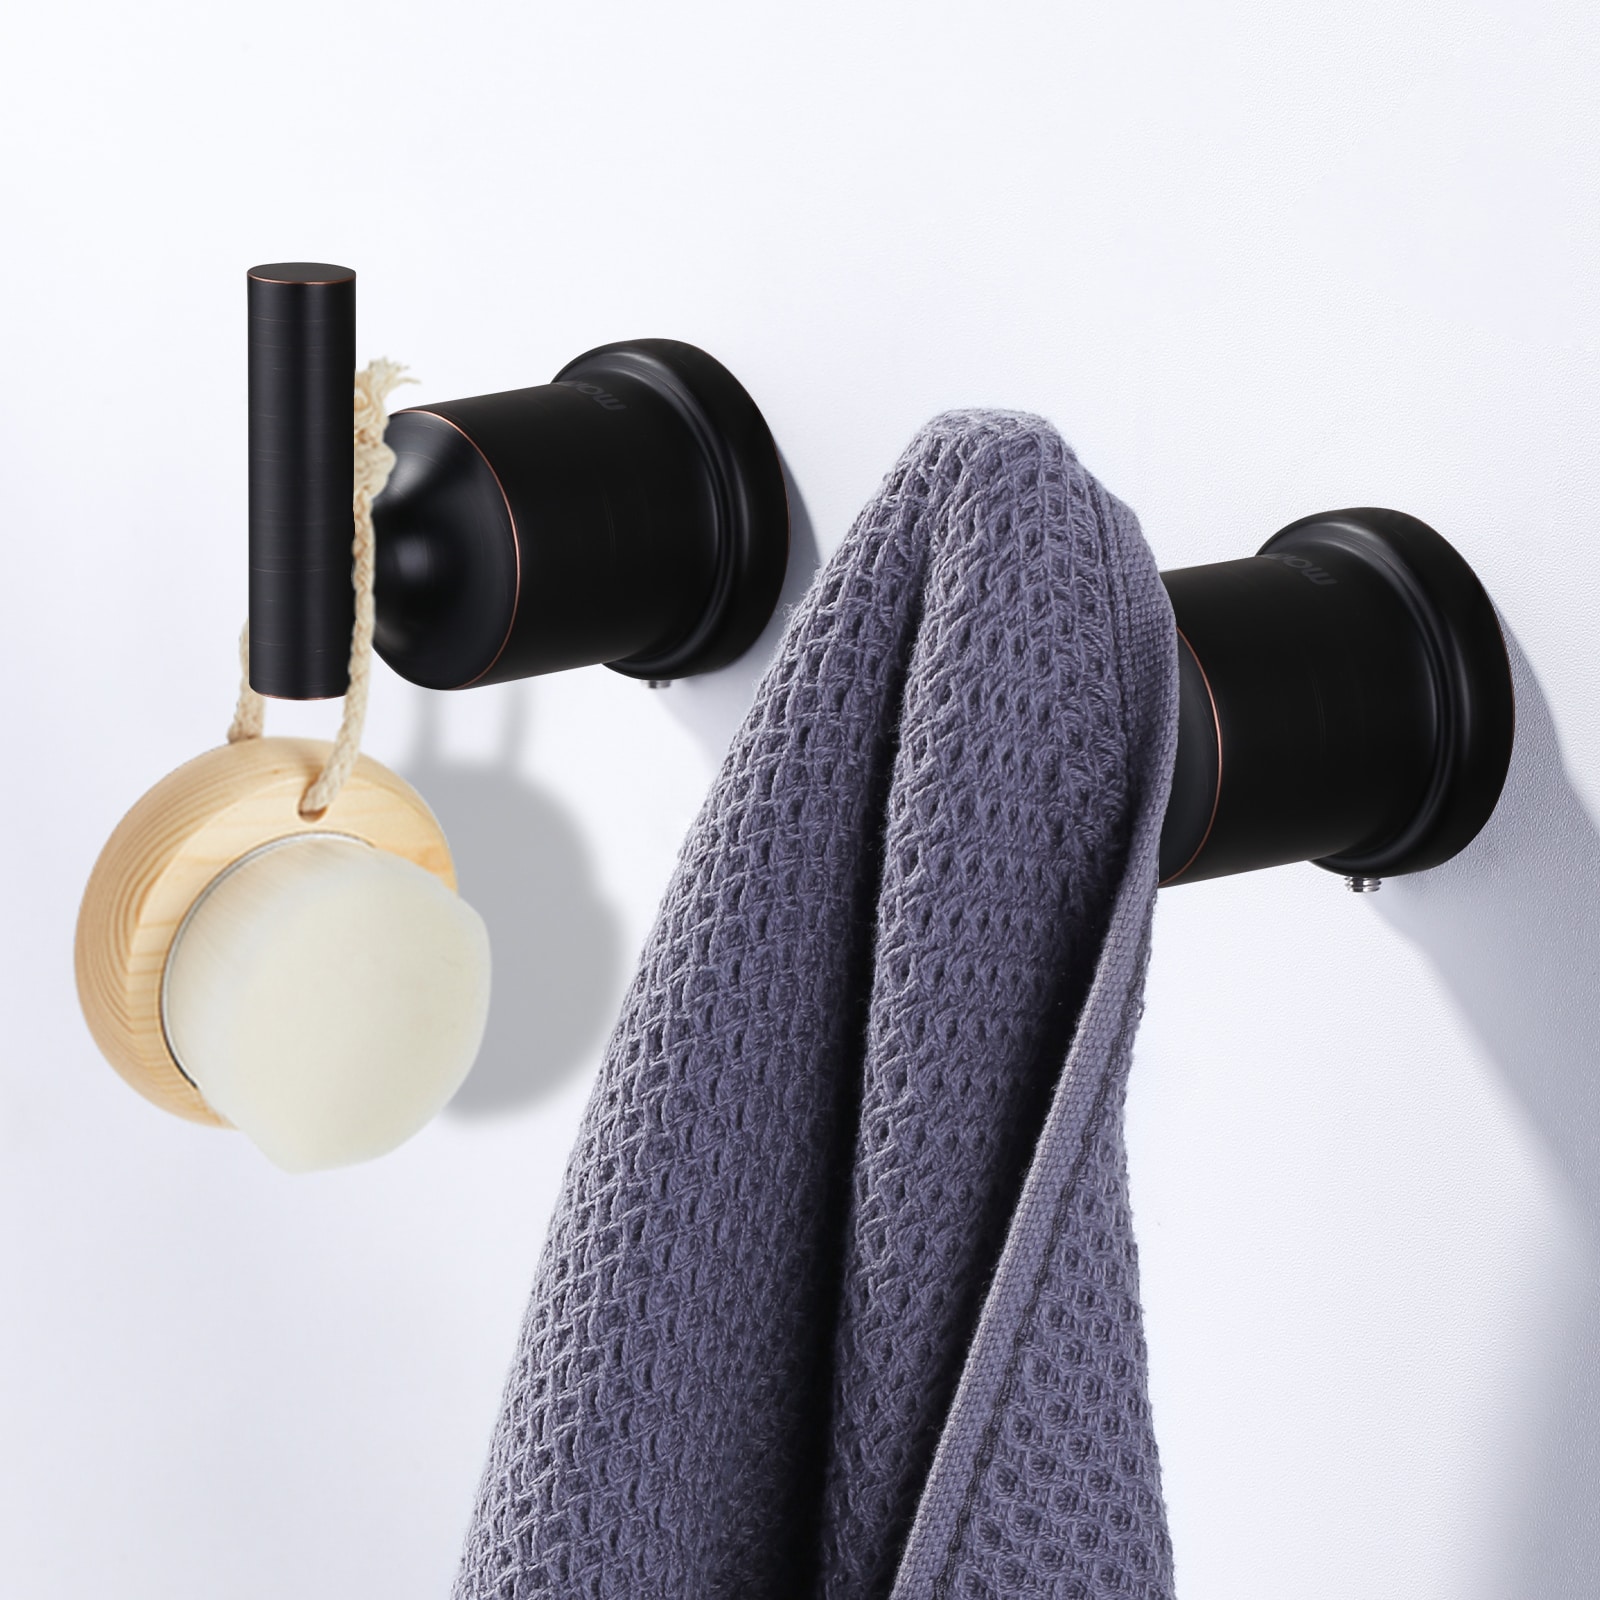 WOWOW Wall Mount Knob Double Robe/Towel Hook in Brushed Nickel